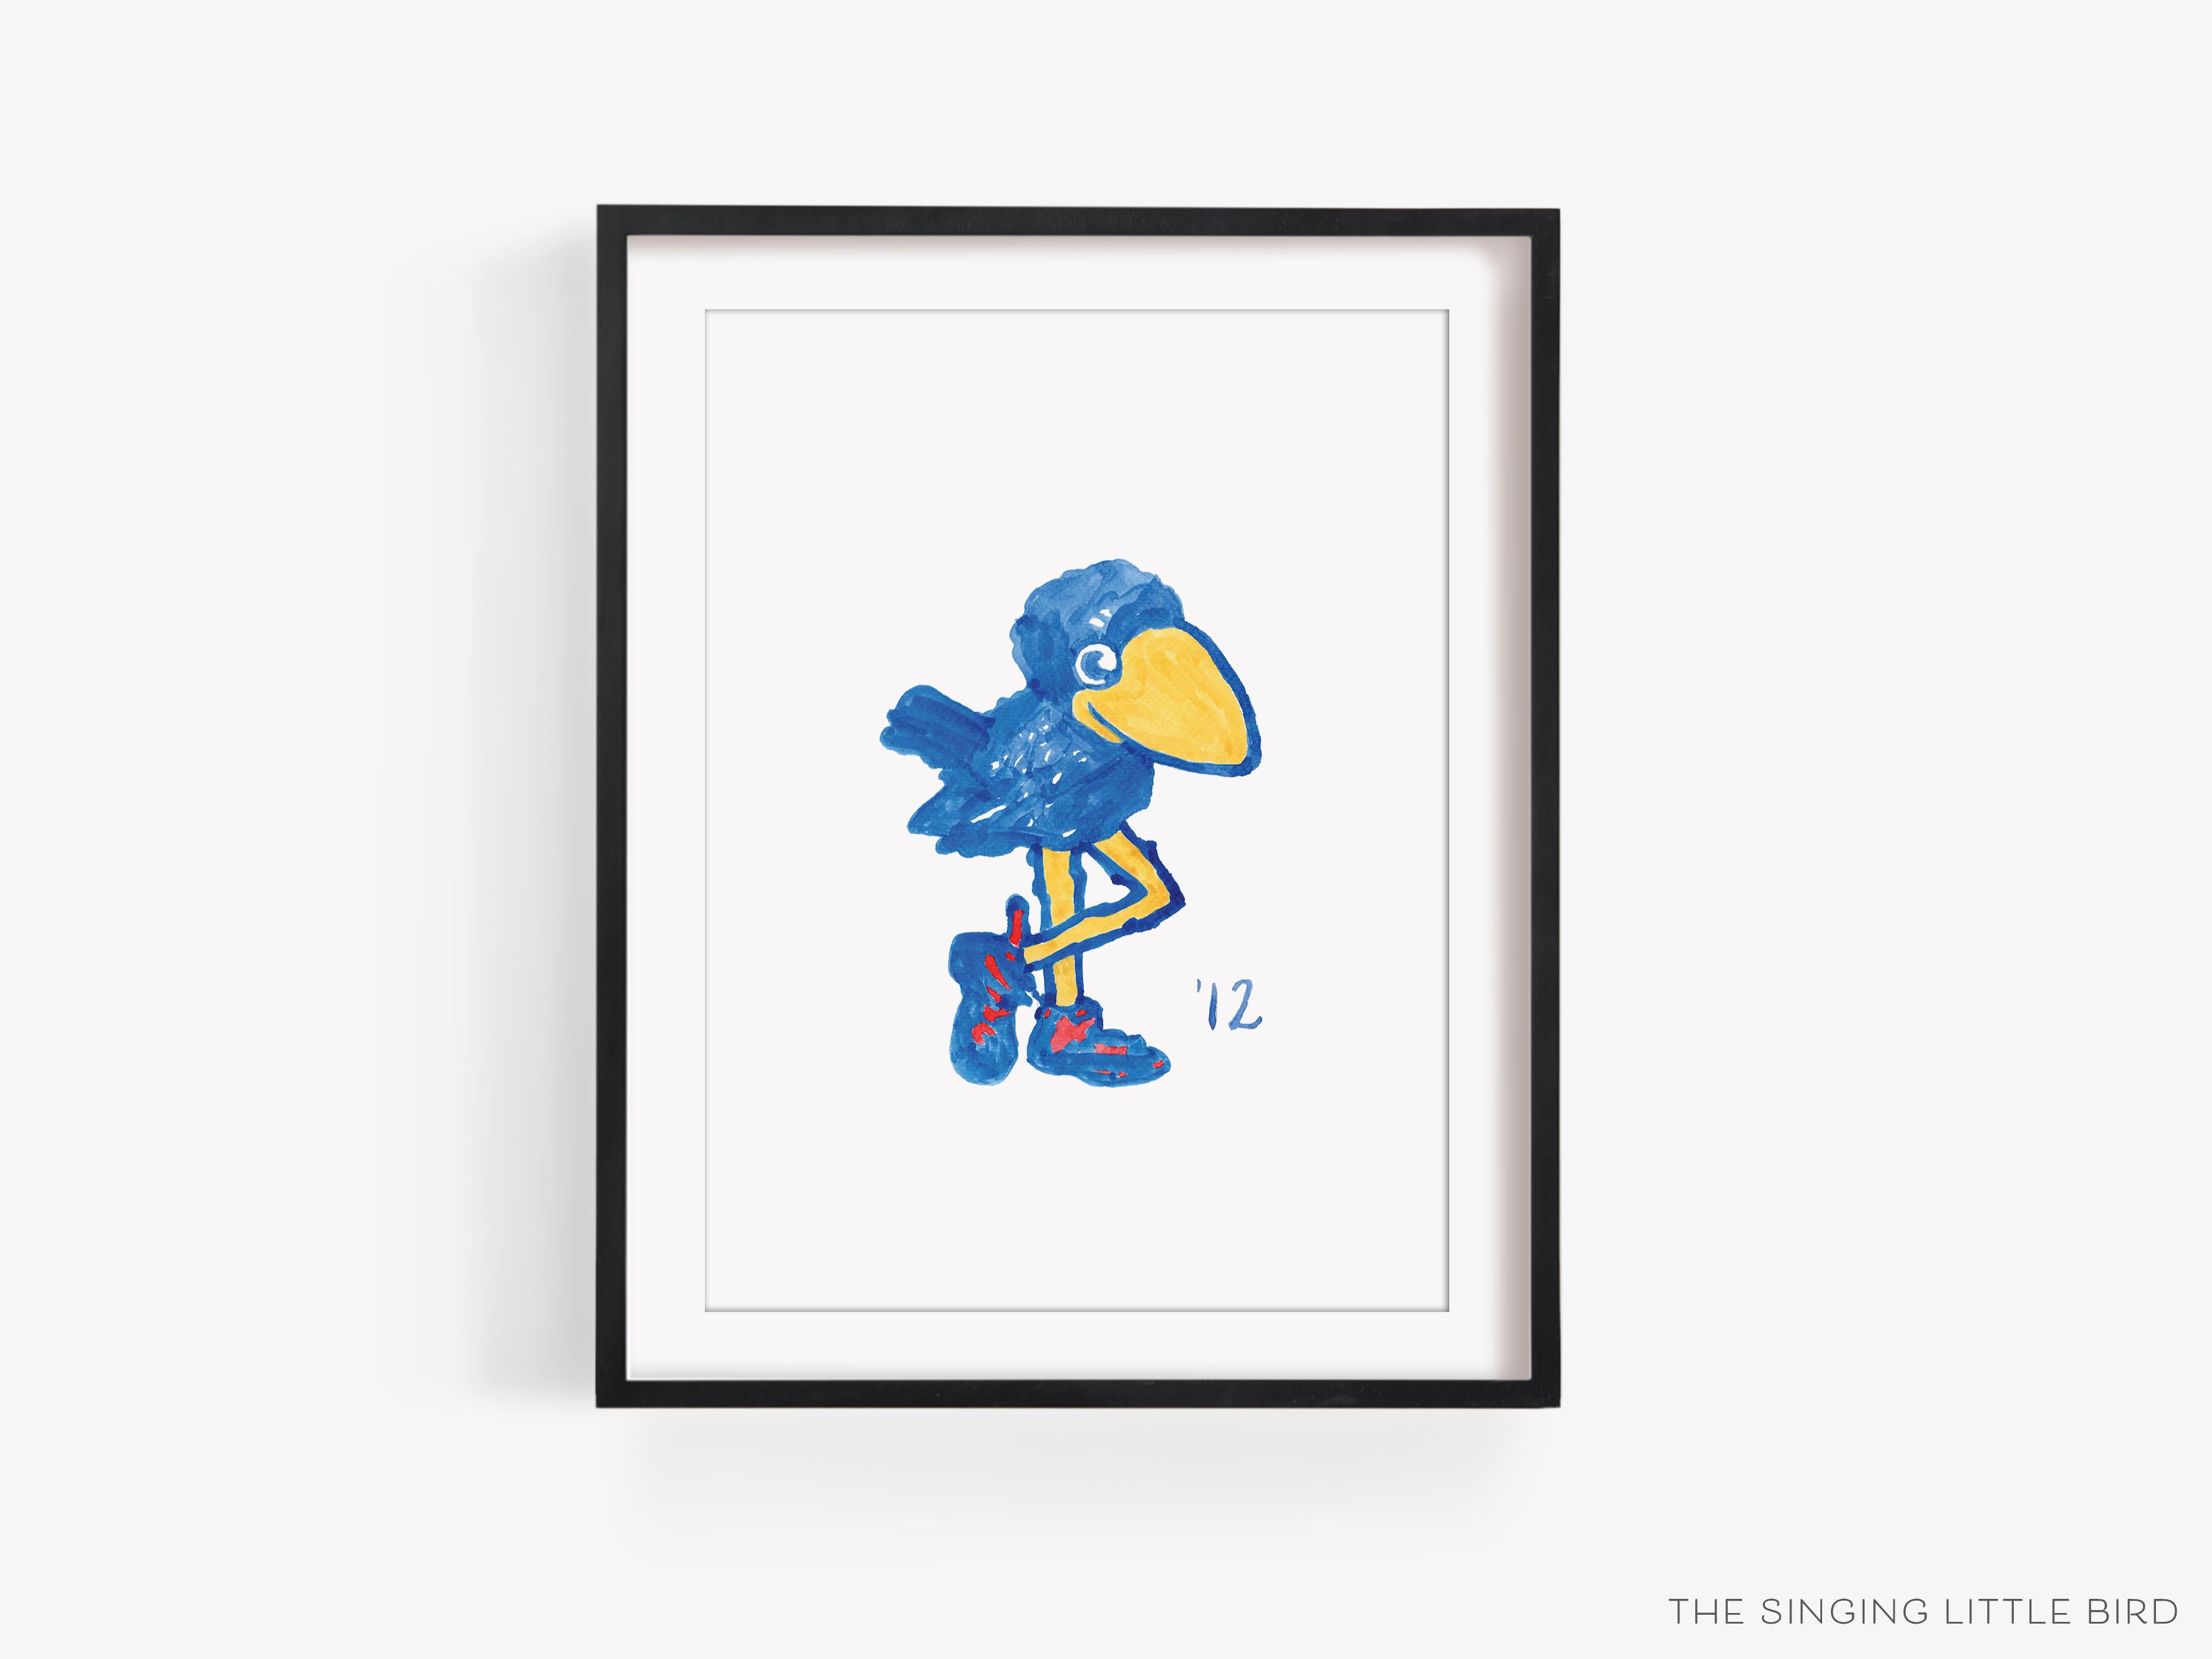 1912 Kansas Jayhawk Art Print [Officially Licensed Product]-This watercolor art print features our hand-painted Kansas Jayhawk, printed in the USA on 120lb high quality art paper. This makes a great gift or wall decor for the University of Kansas lover in your life.-The Singing Little Bird